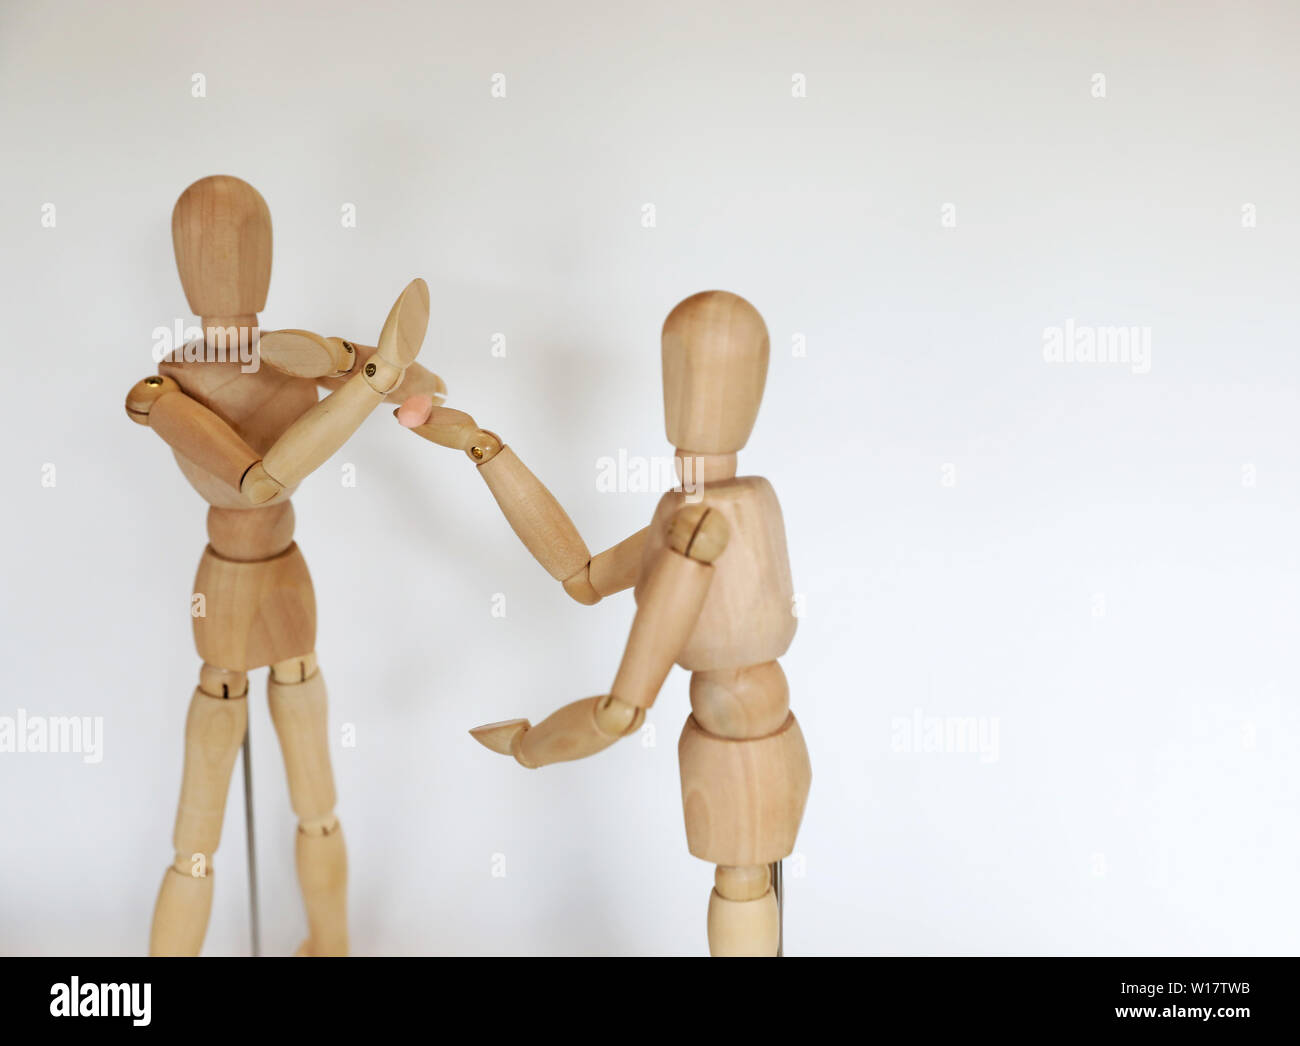 two wooden mannequin figures dealing and saying no to party drugs pills. Pill testing at music festival concept. Making healthy personal life choices Stock Photo